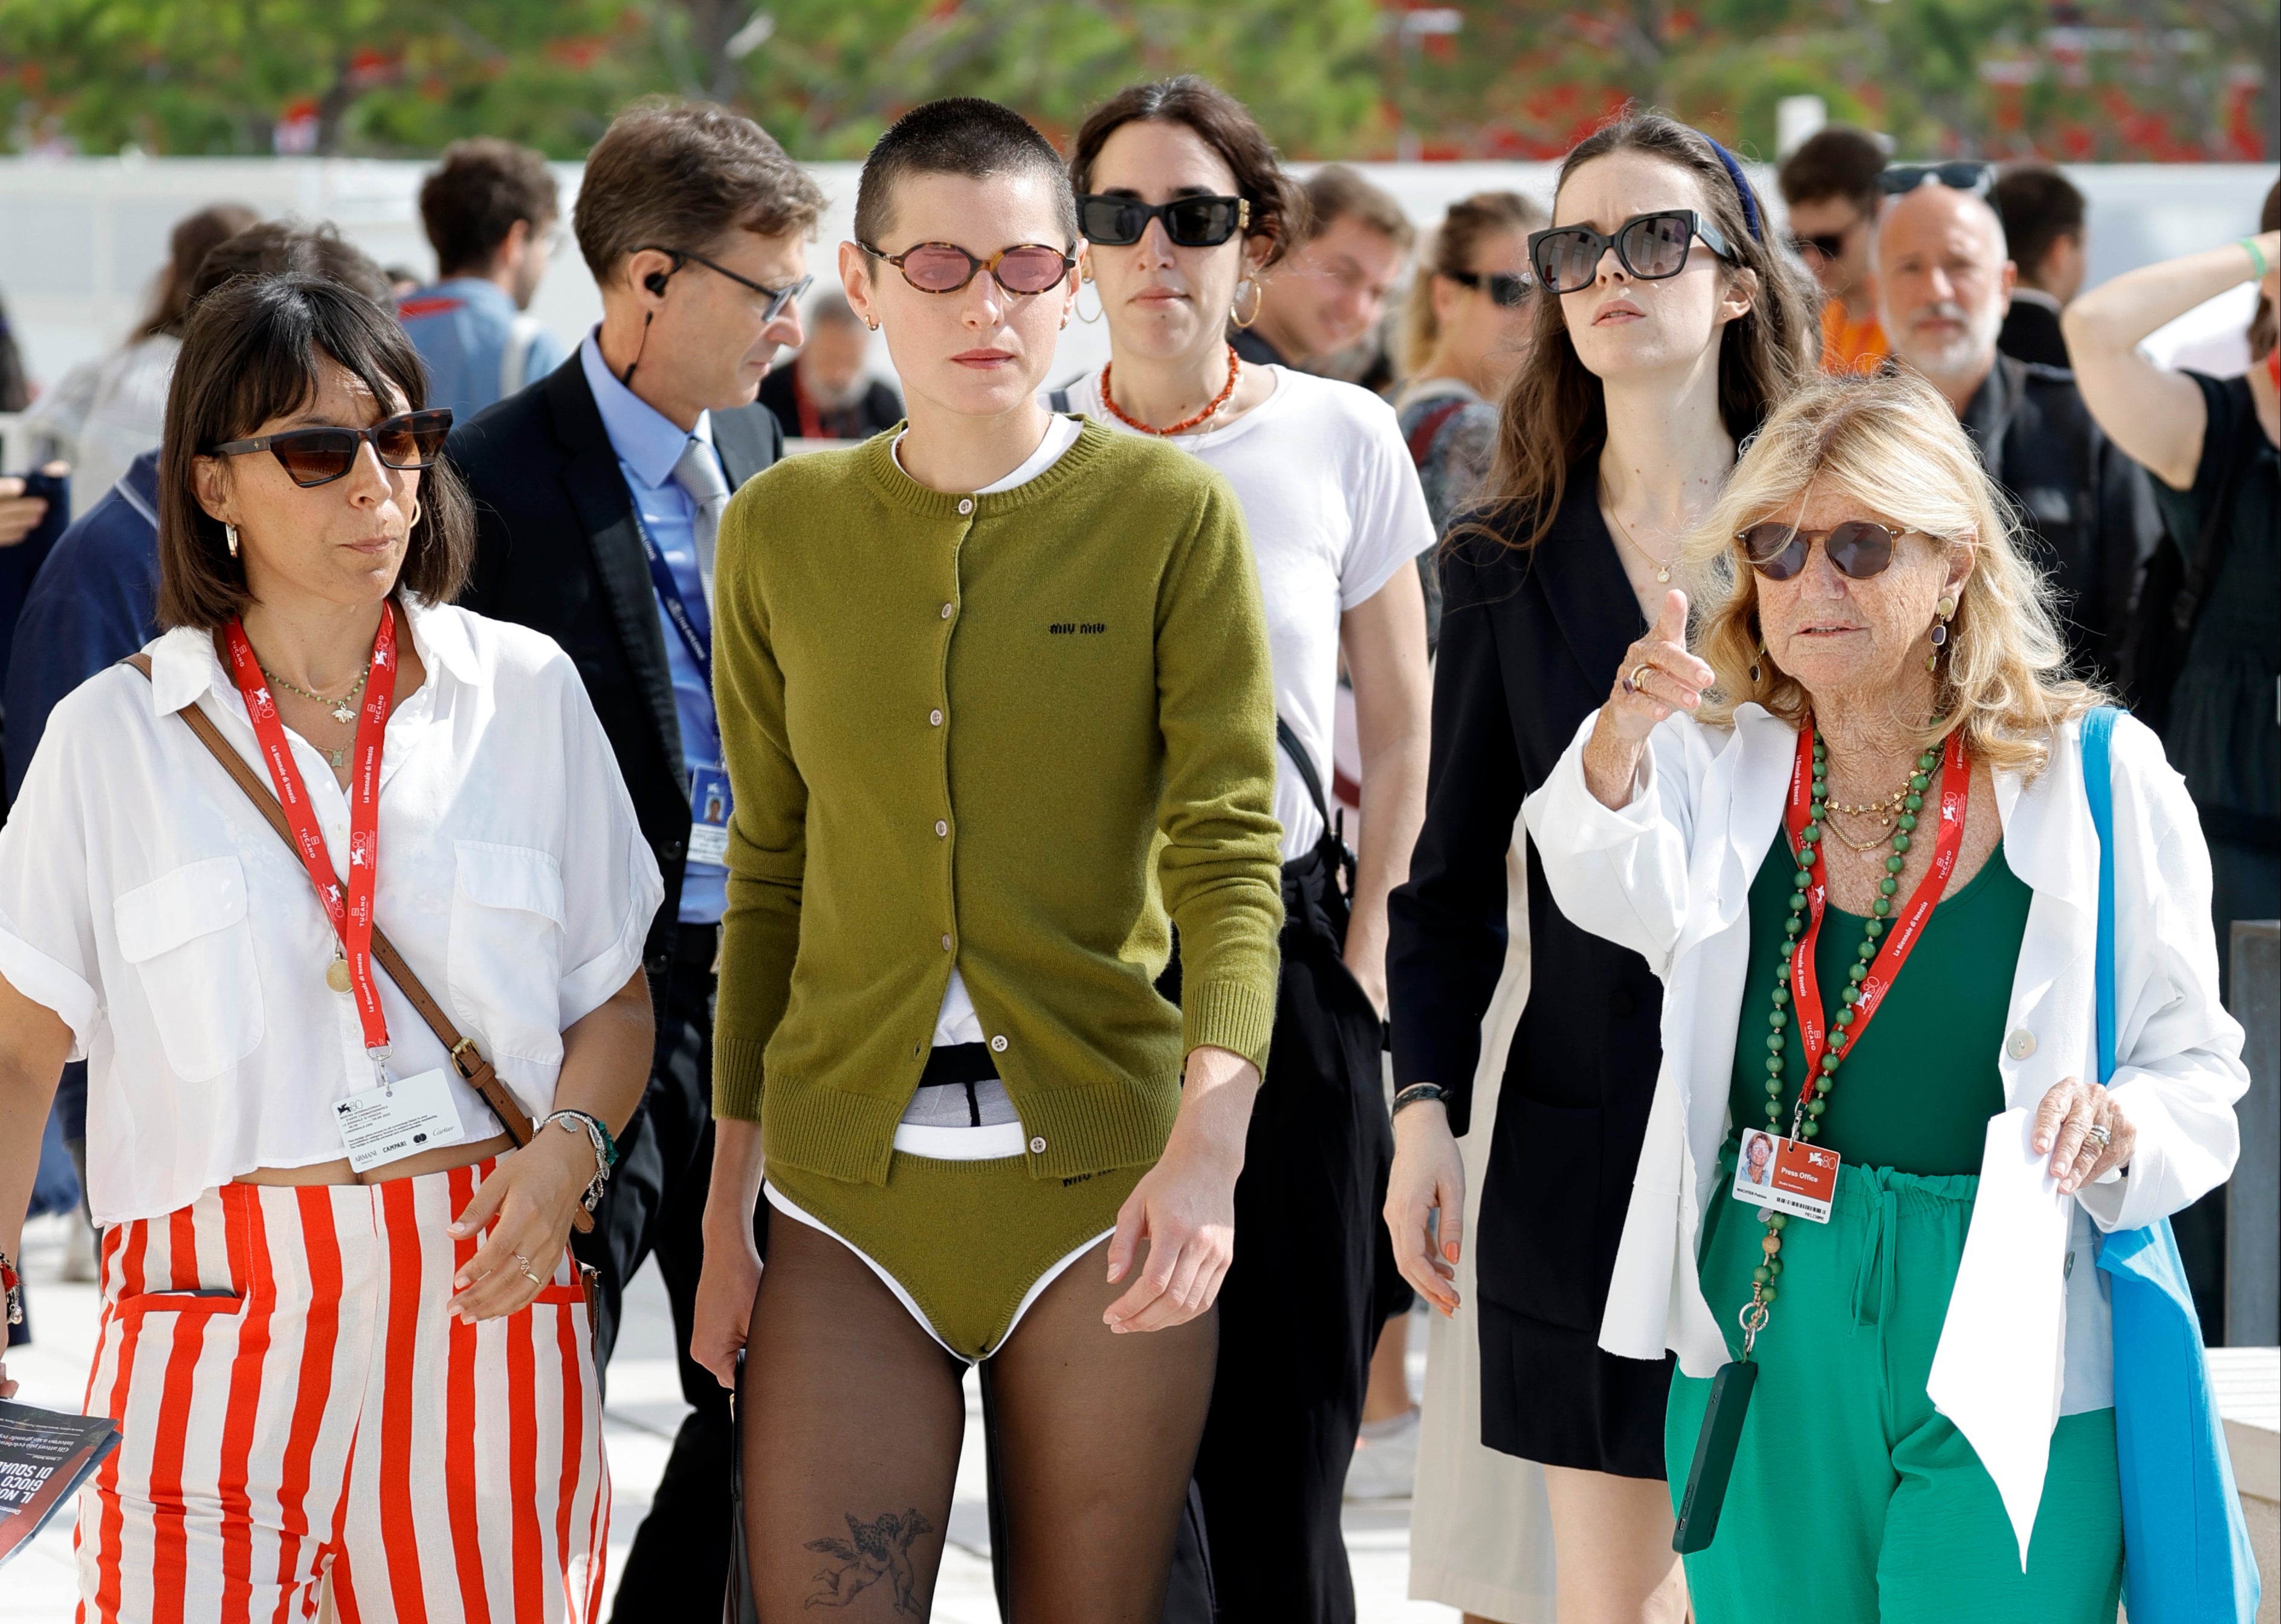 Emma Corrin rocked the ‘underwear-as-outerwear’ look at the Venice Film Festival in September